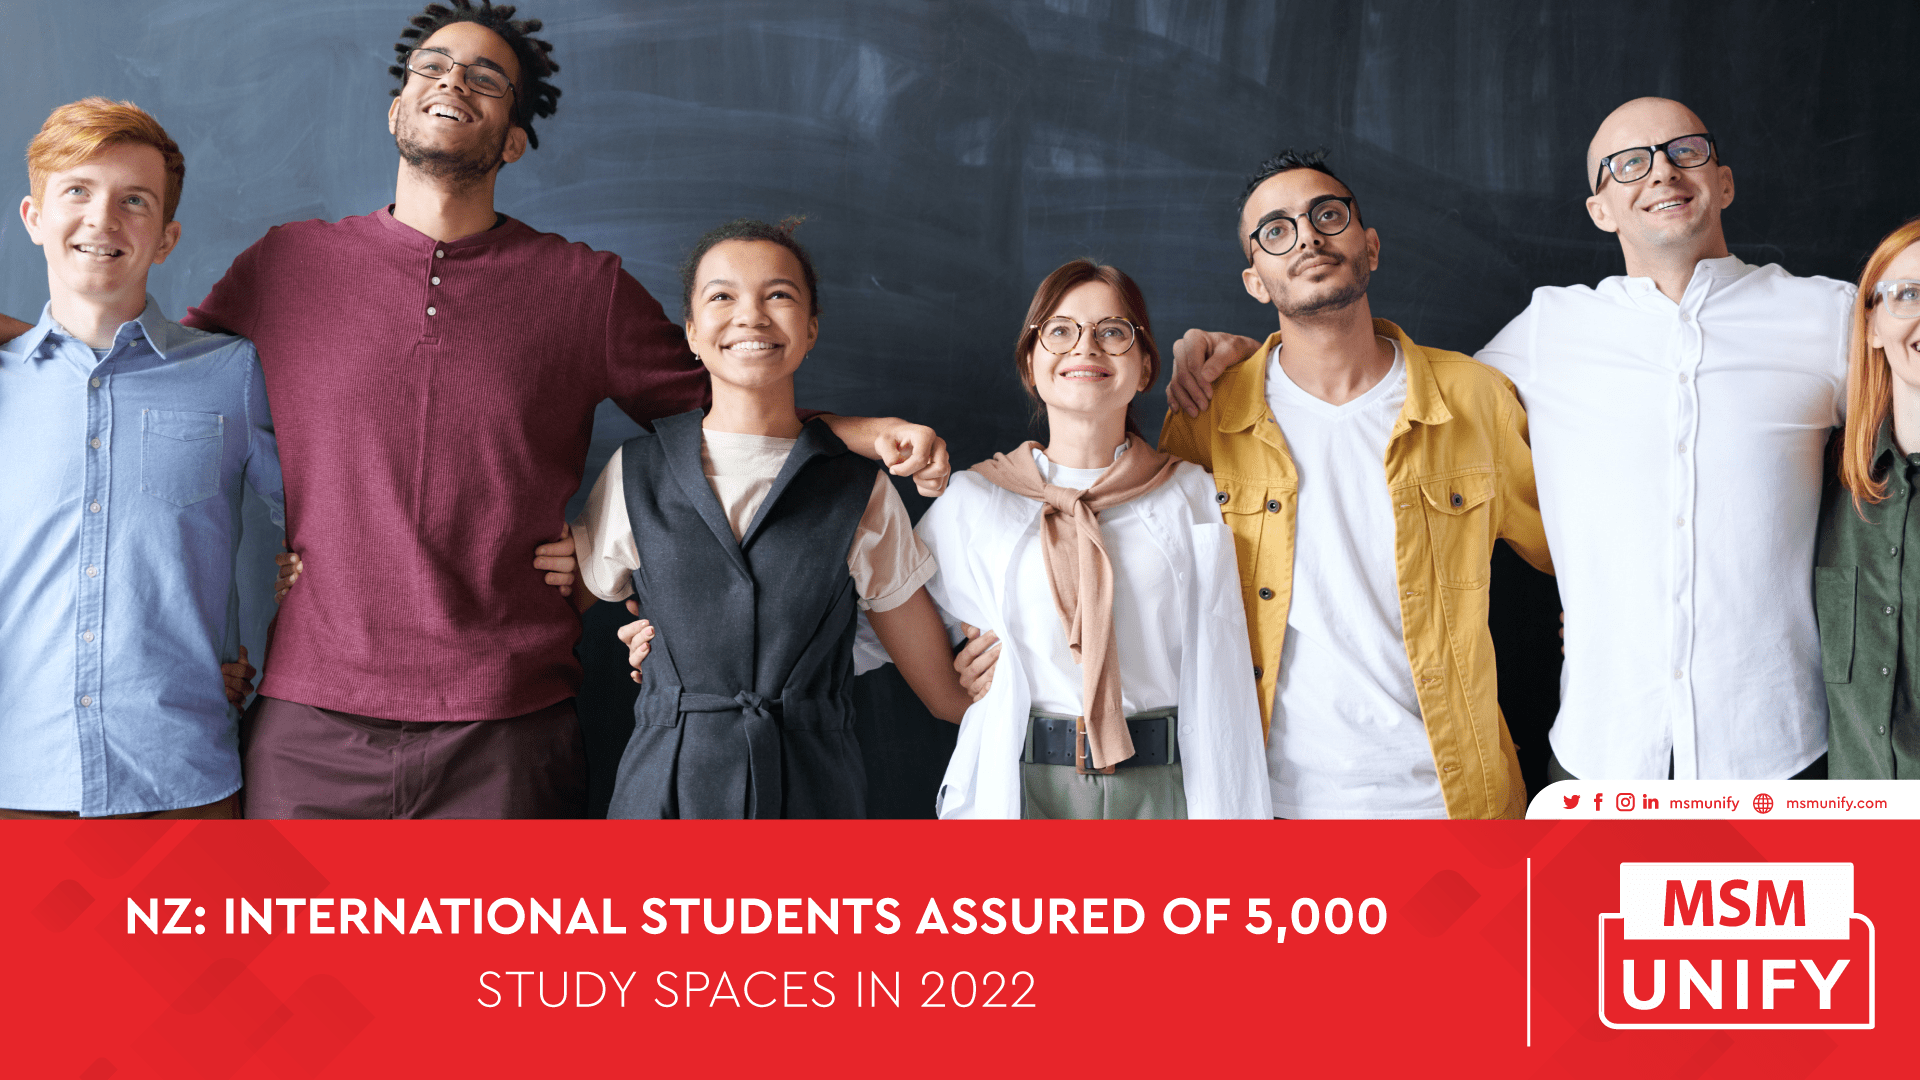 MSM Unify NZ International Students Assured of 5000 Study Spaces in 2022